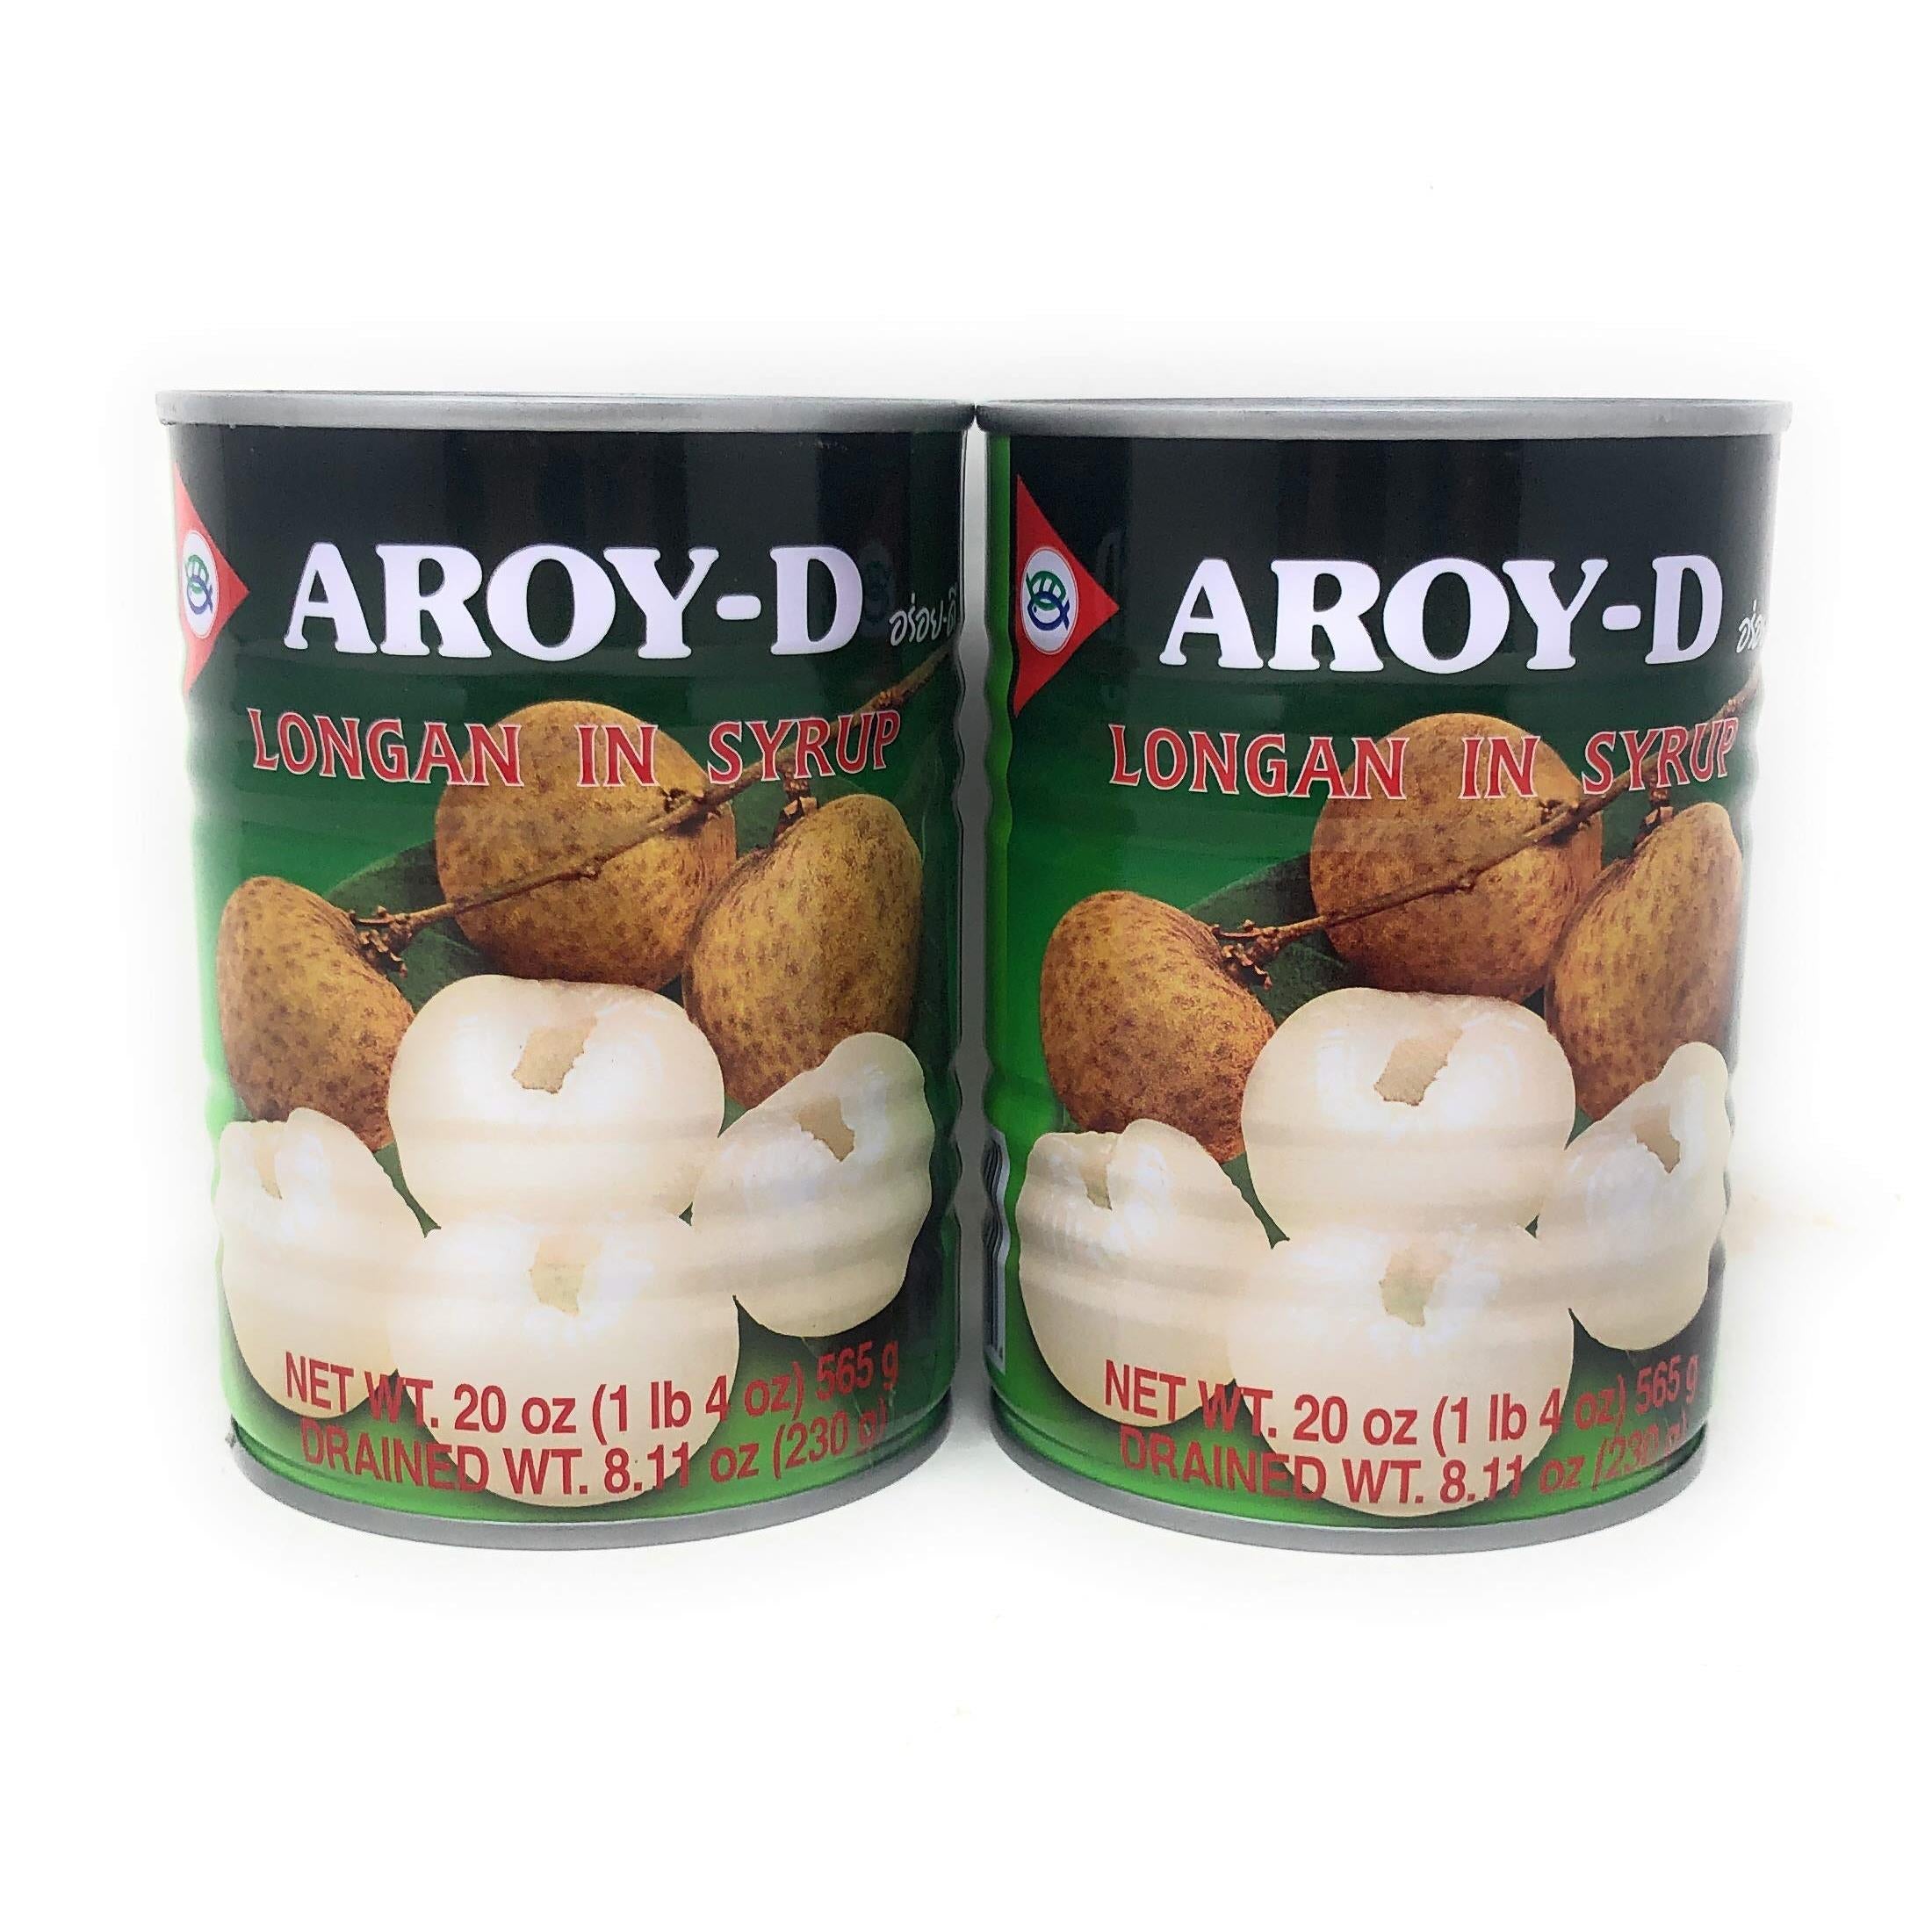 Aroy-D Longan in Syrup 20oz (565g), 2 pack